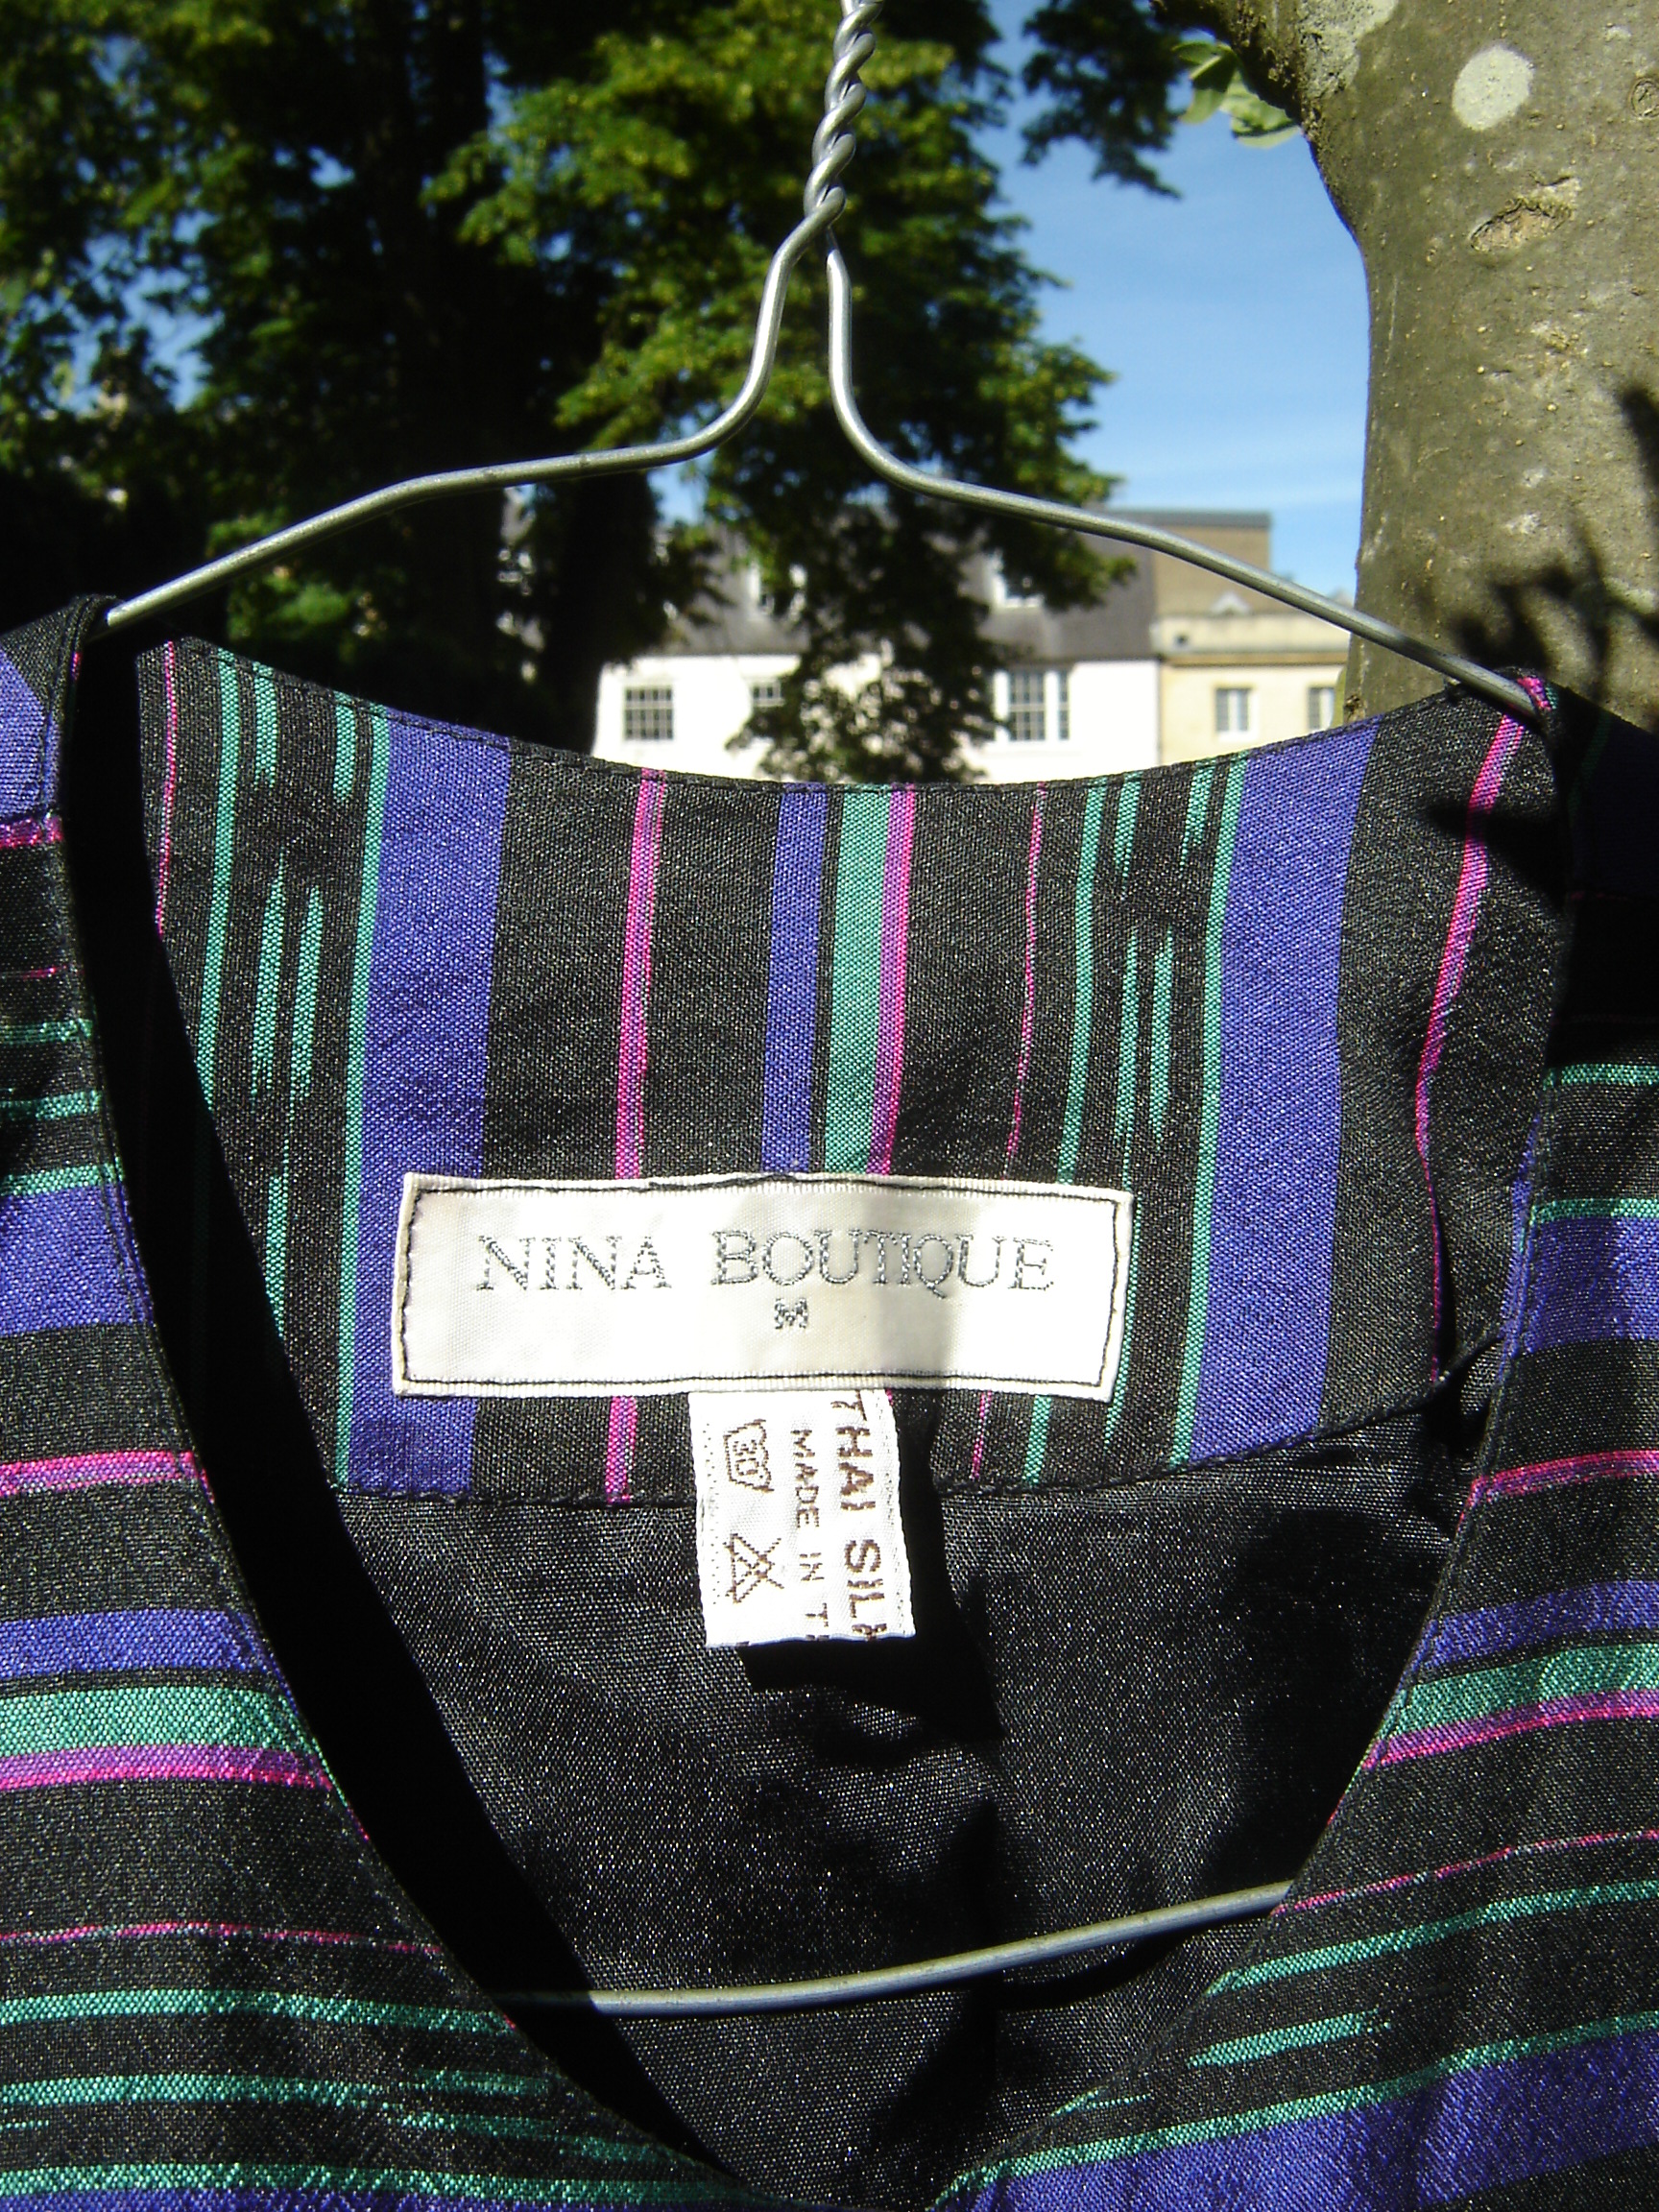 Nina Boutique striped silk top, showing label.